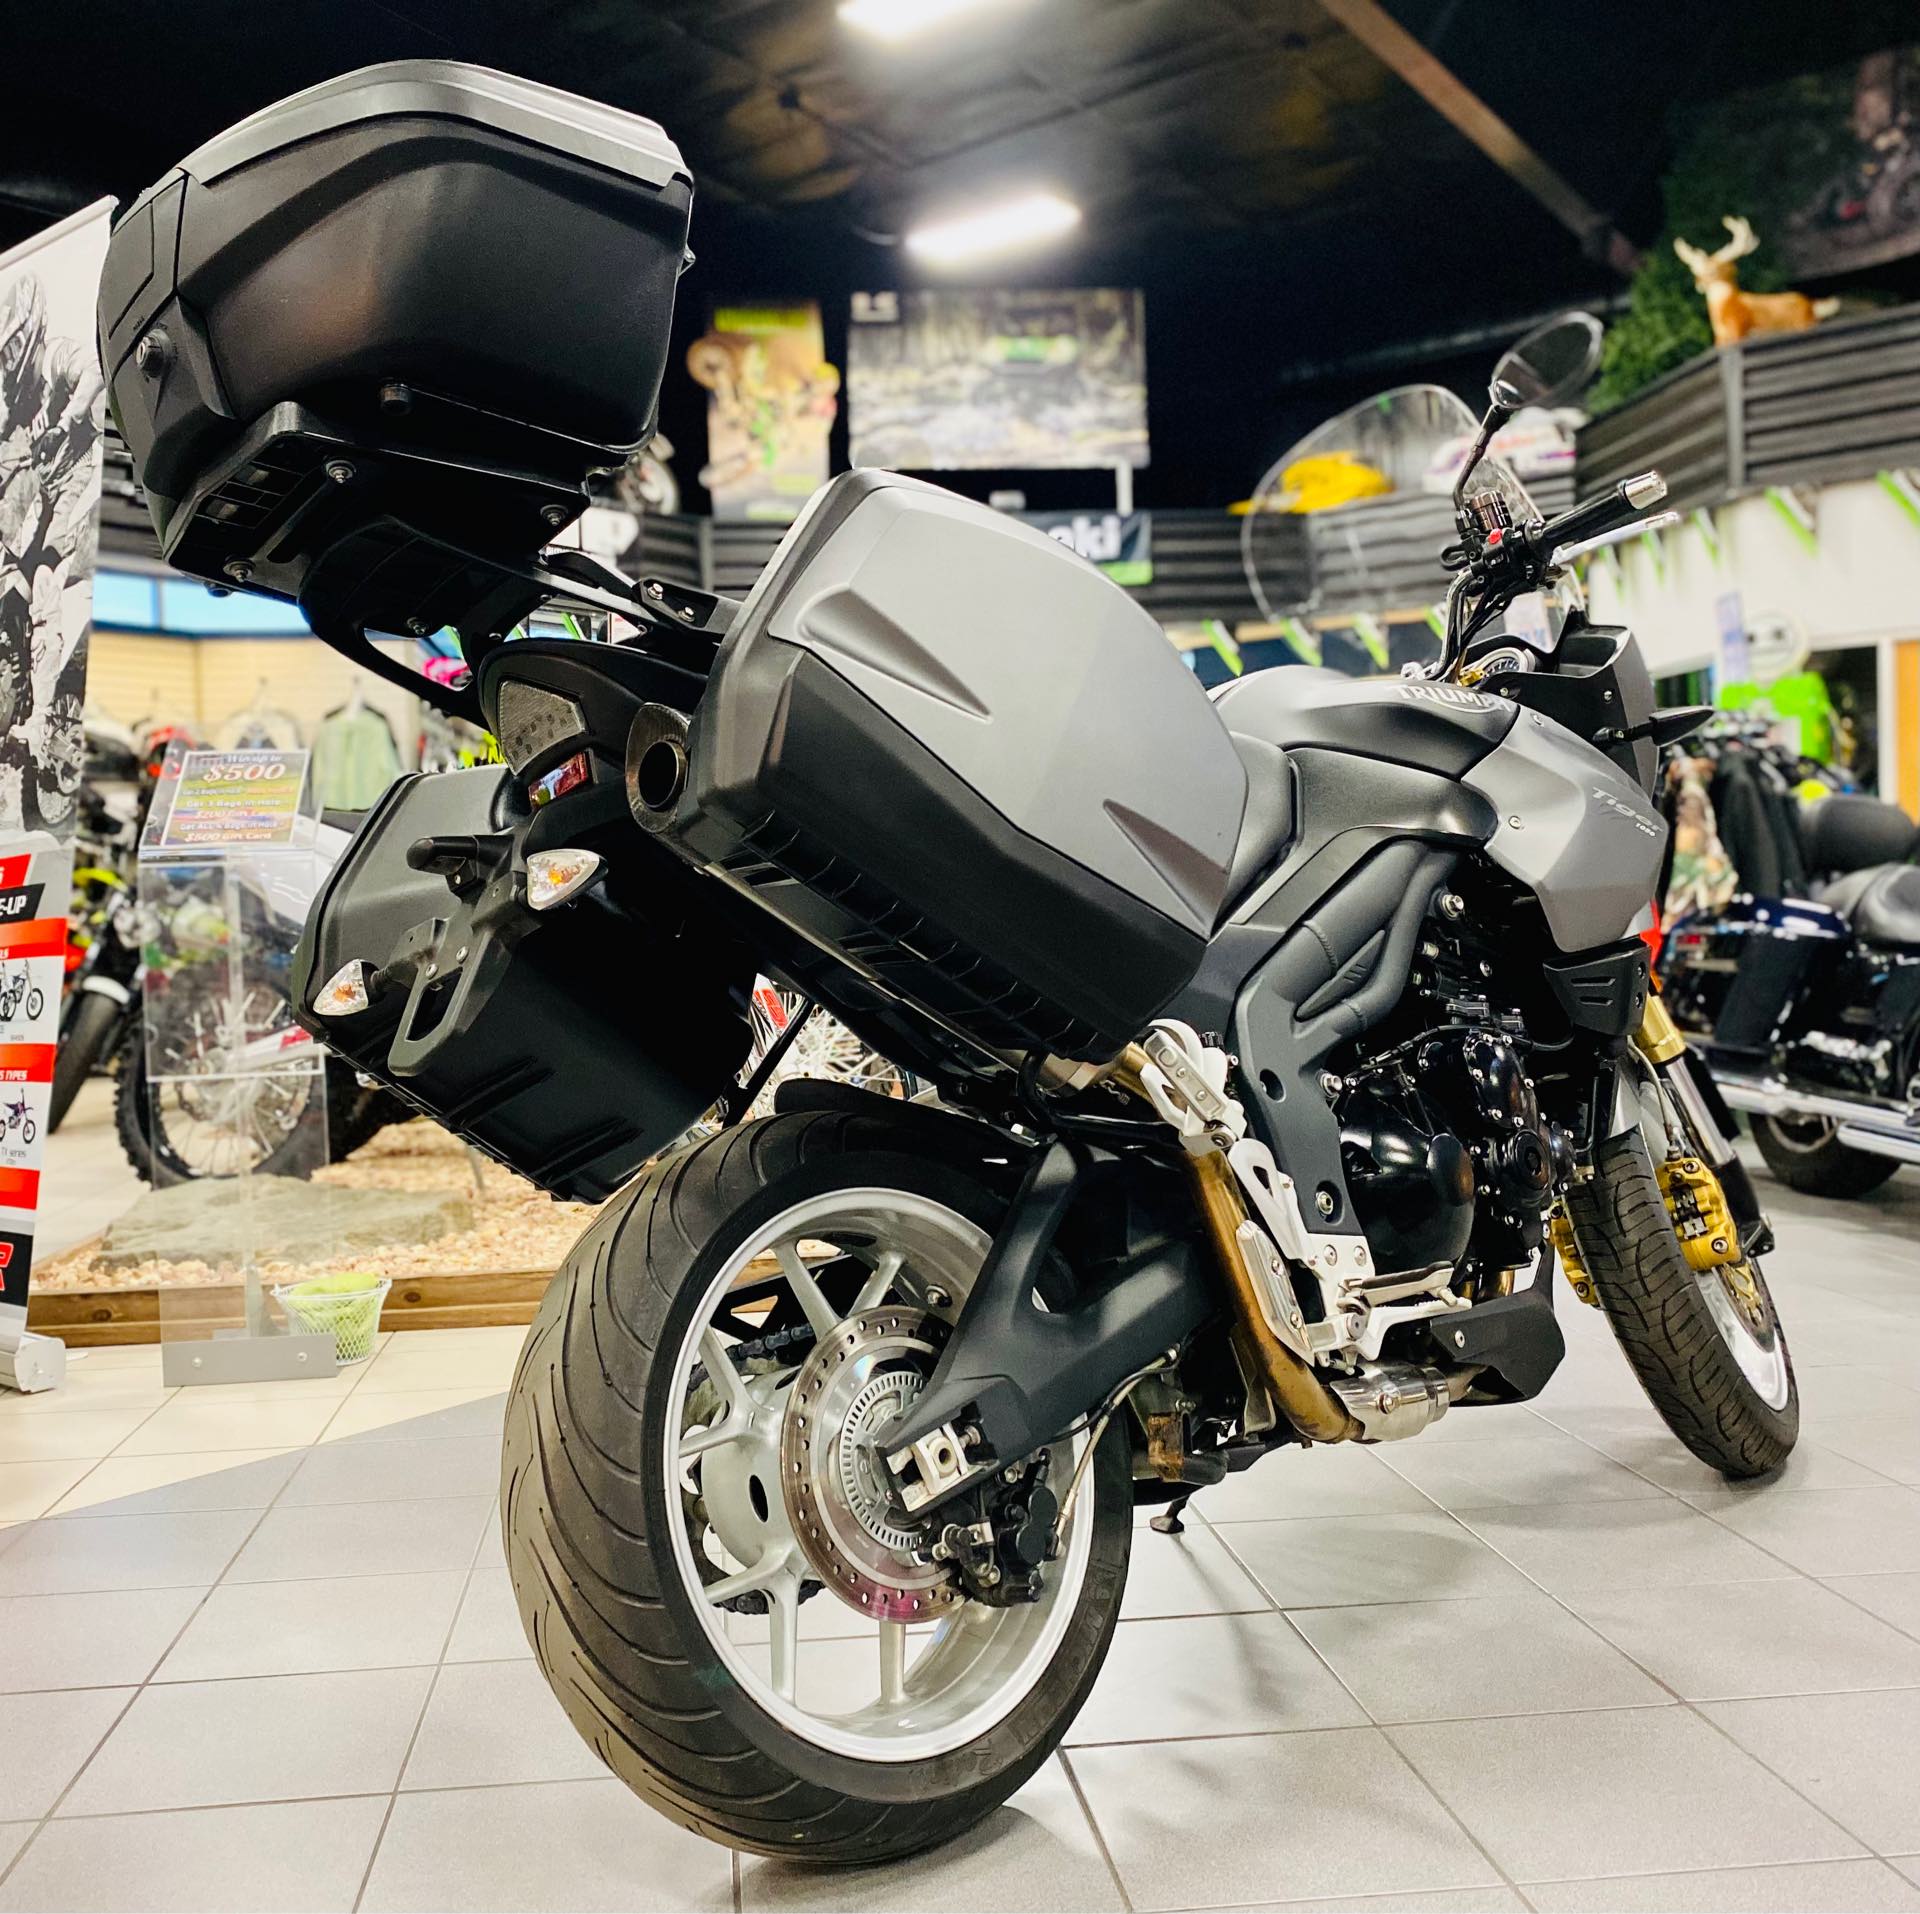 2010 Triumph Tiger 1050 SE at Rod's Ride On Powersports